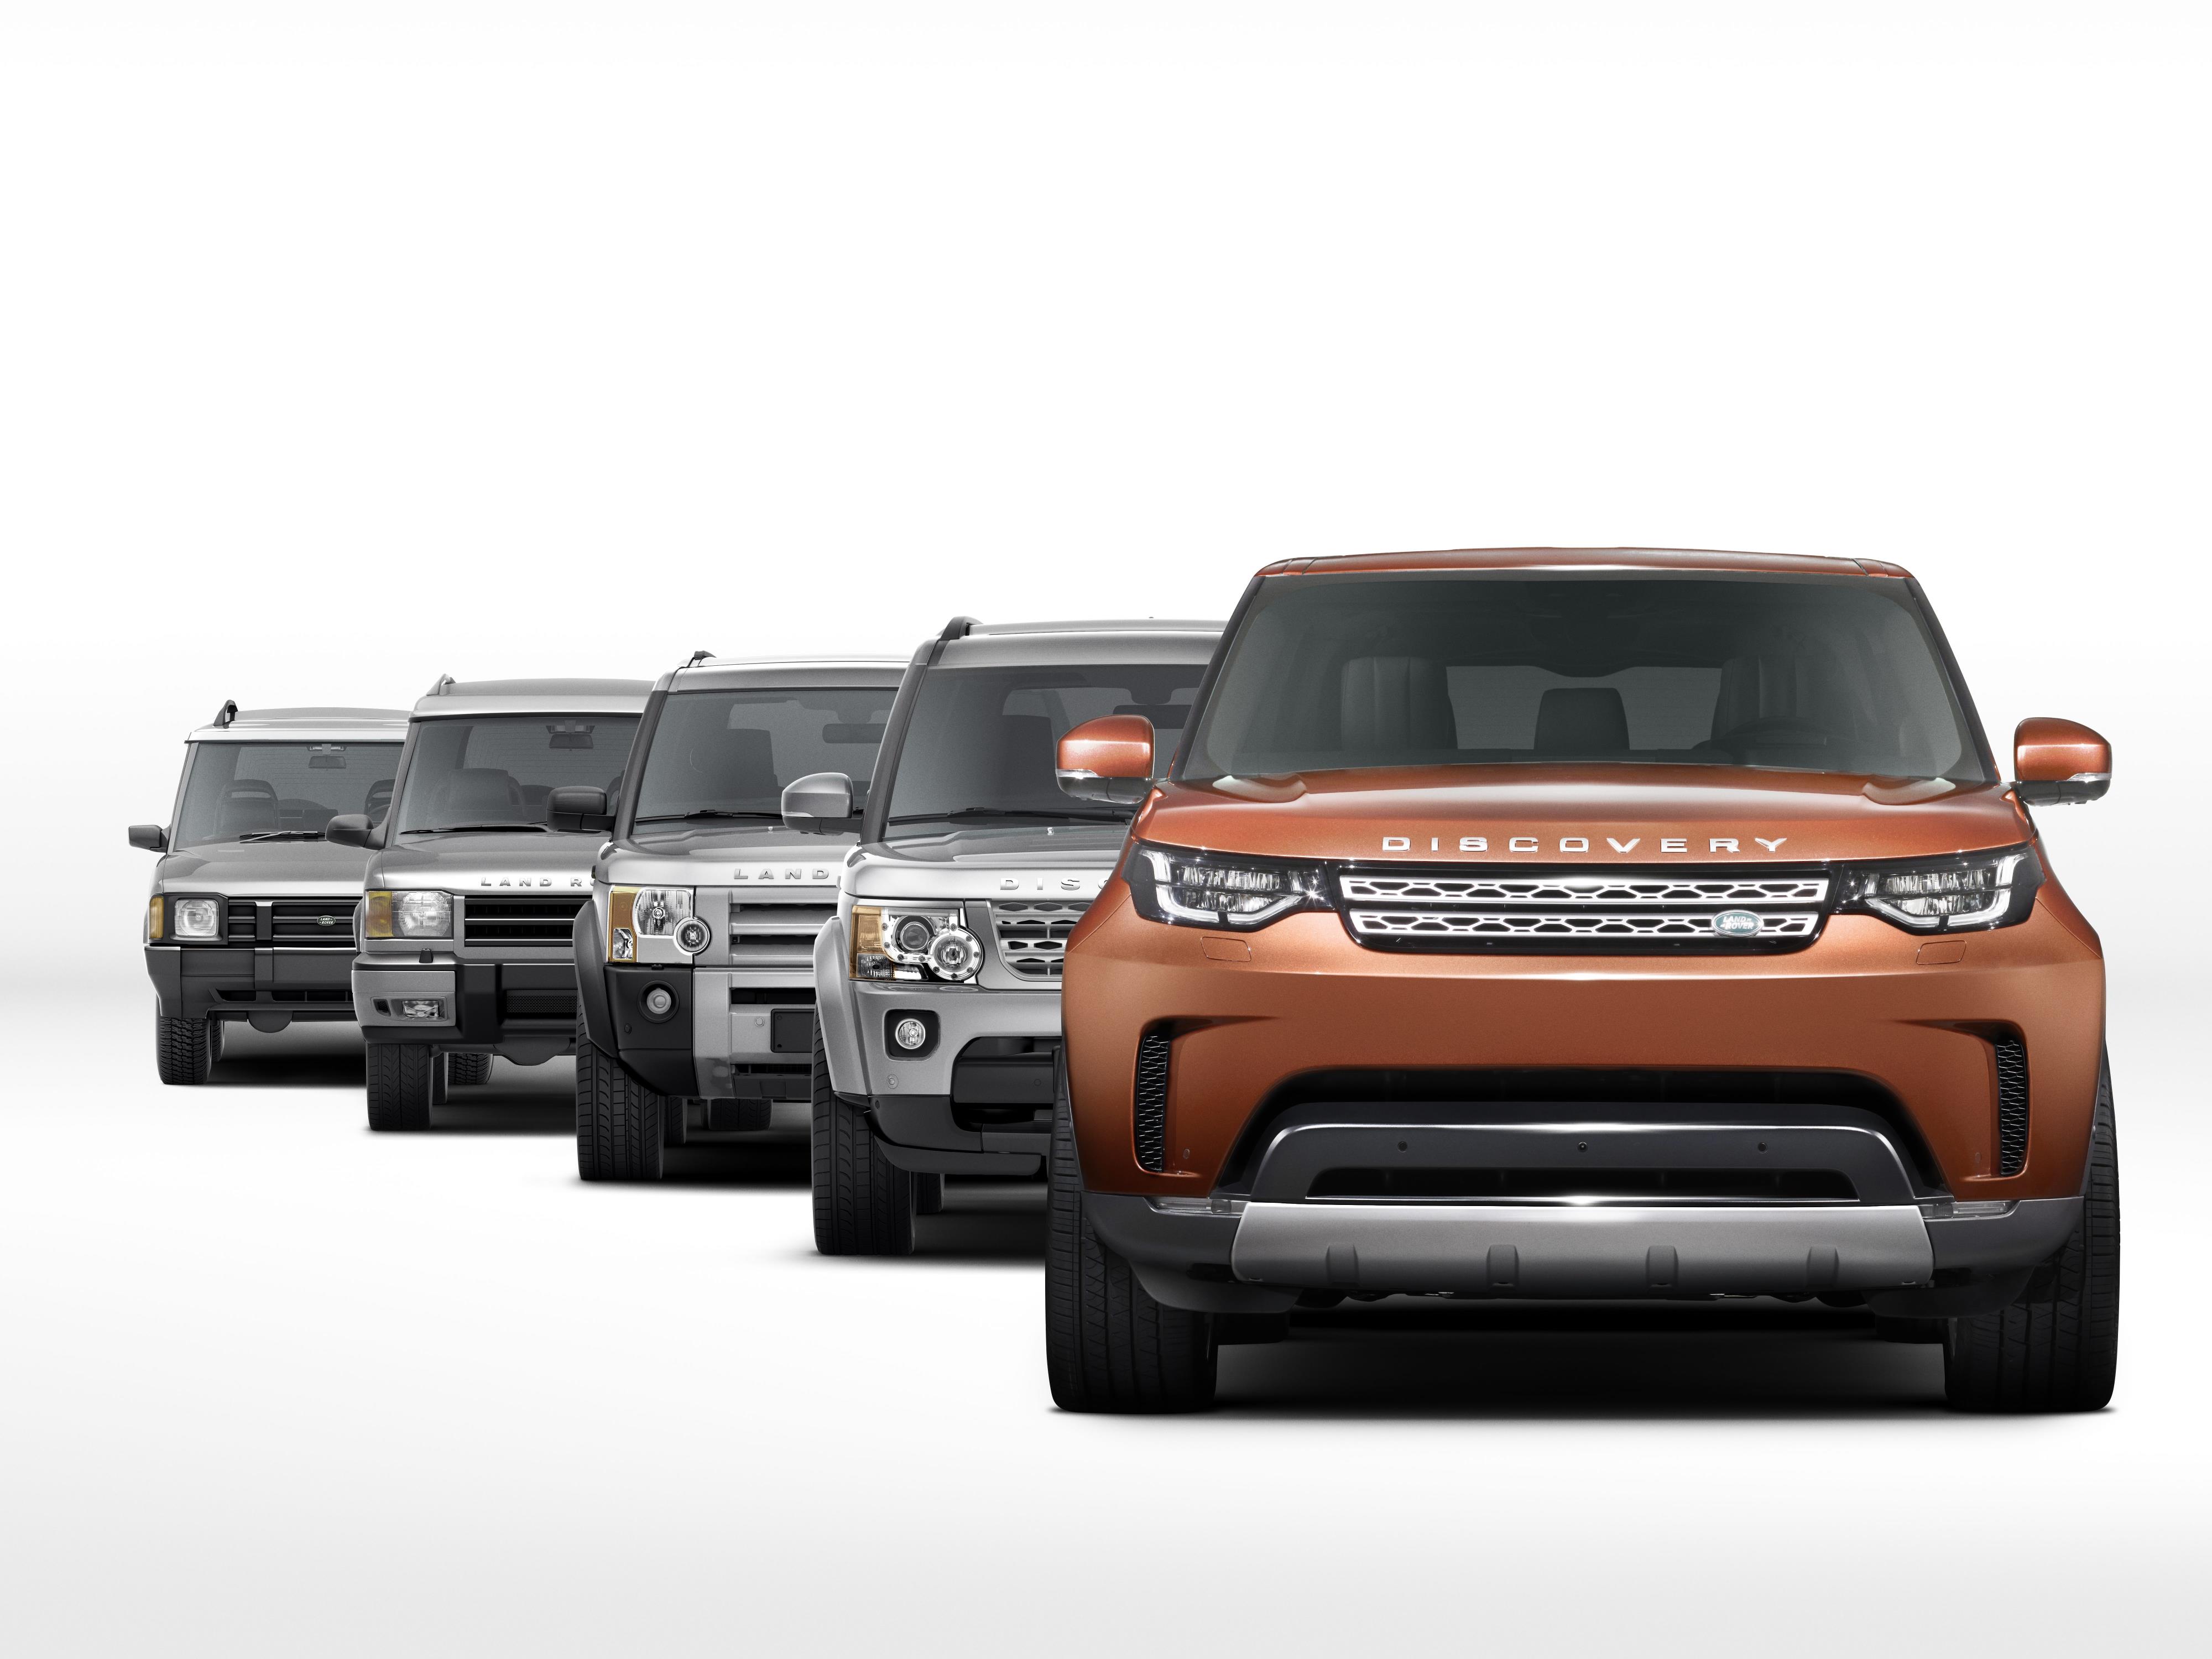 Land Rover Discovery through the years